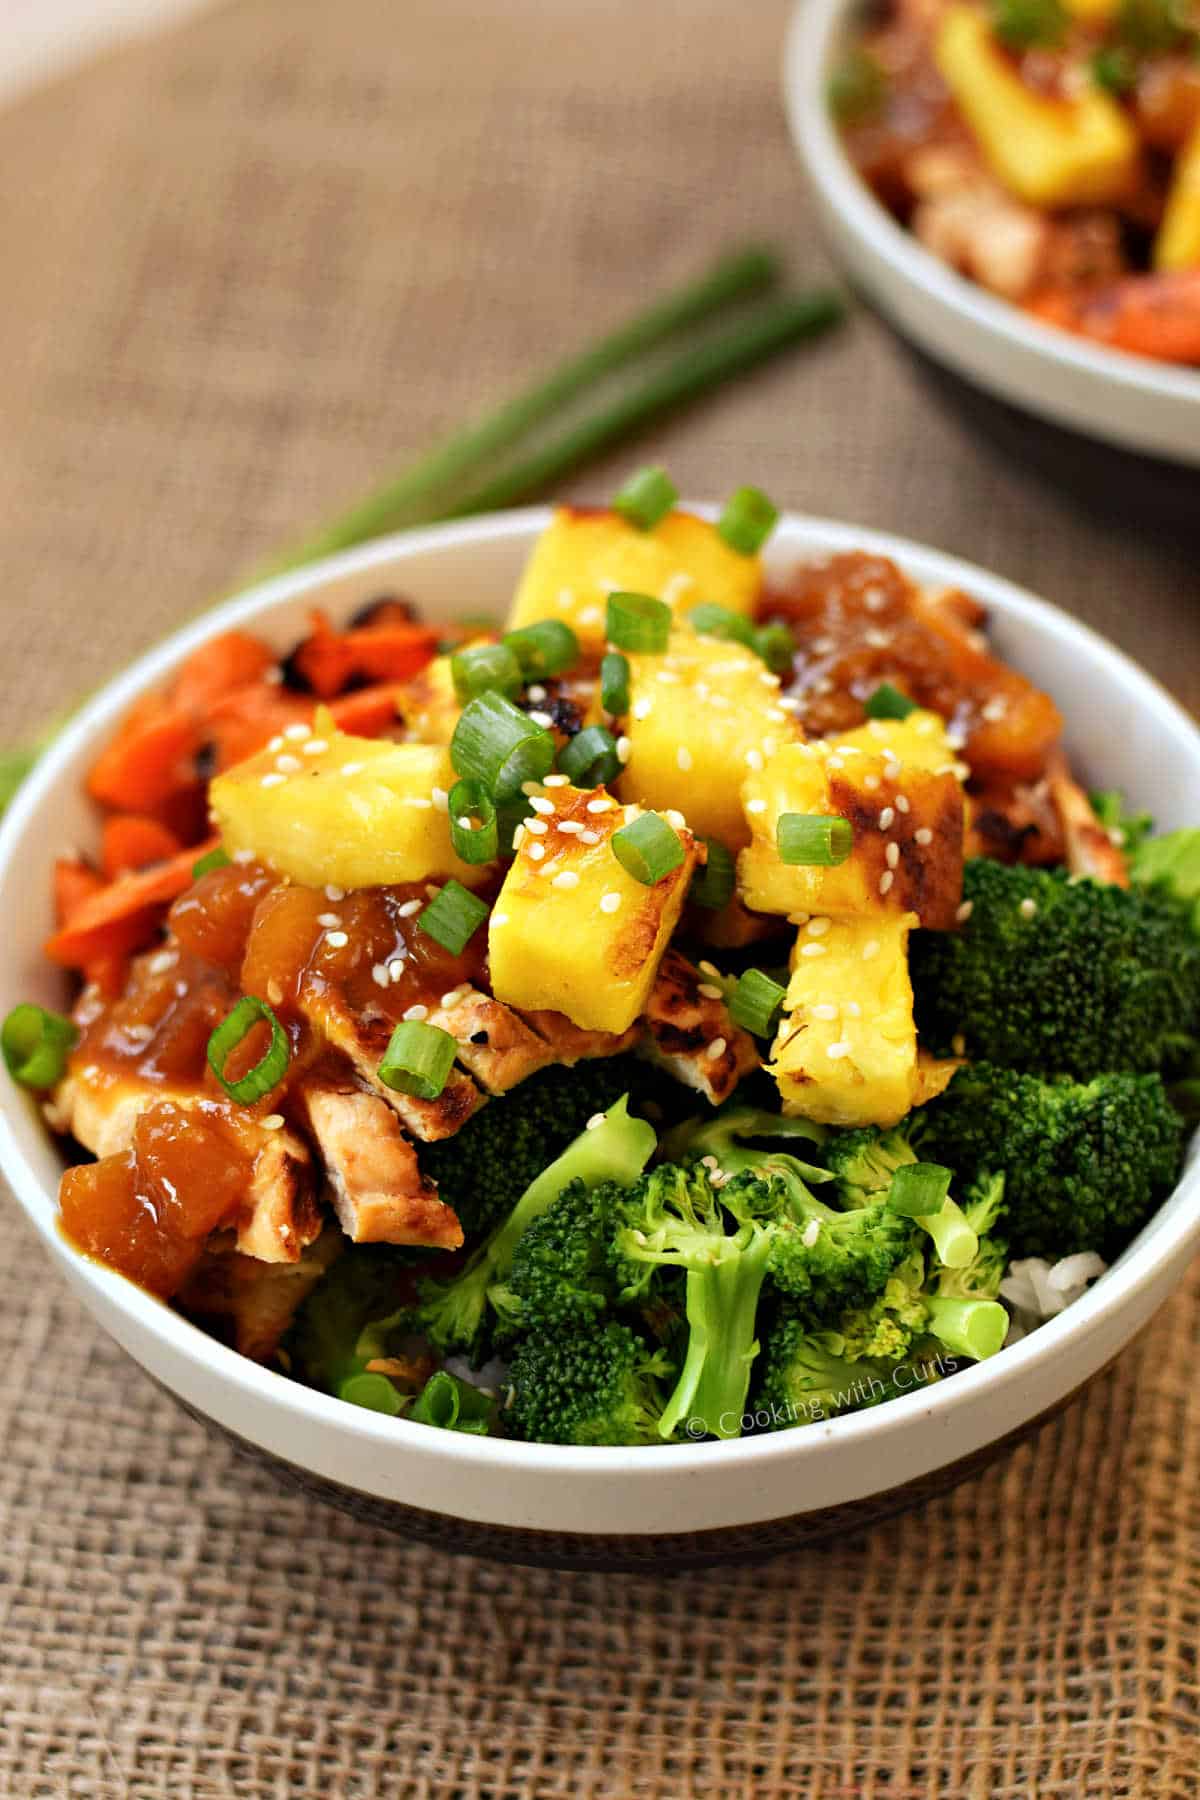 Two grilled chicken teriyaki bowls with broccoli, carrots, and pineapple chunks over rice.